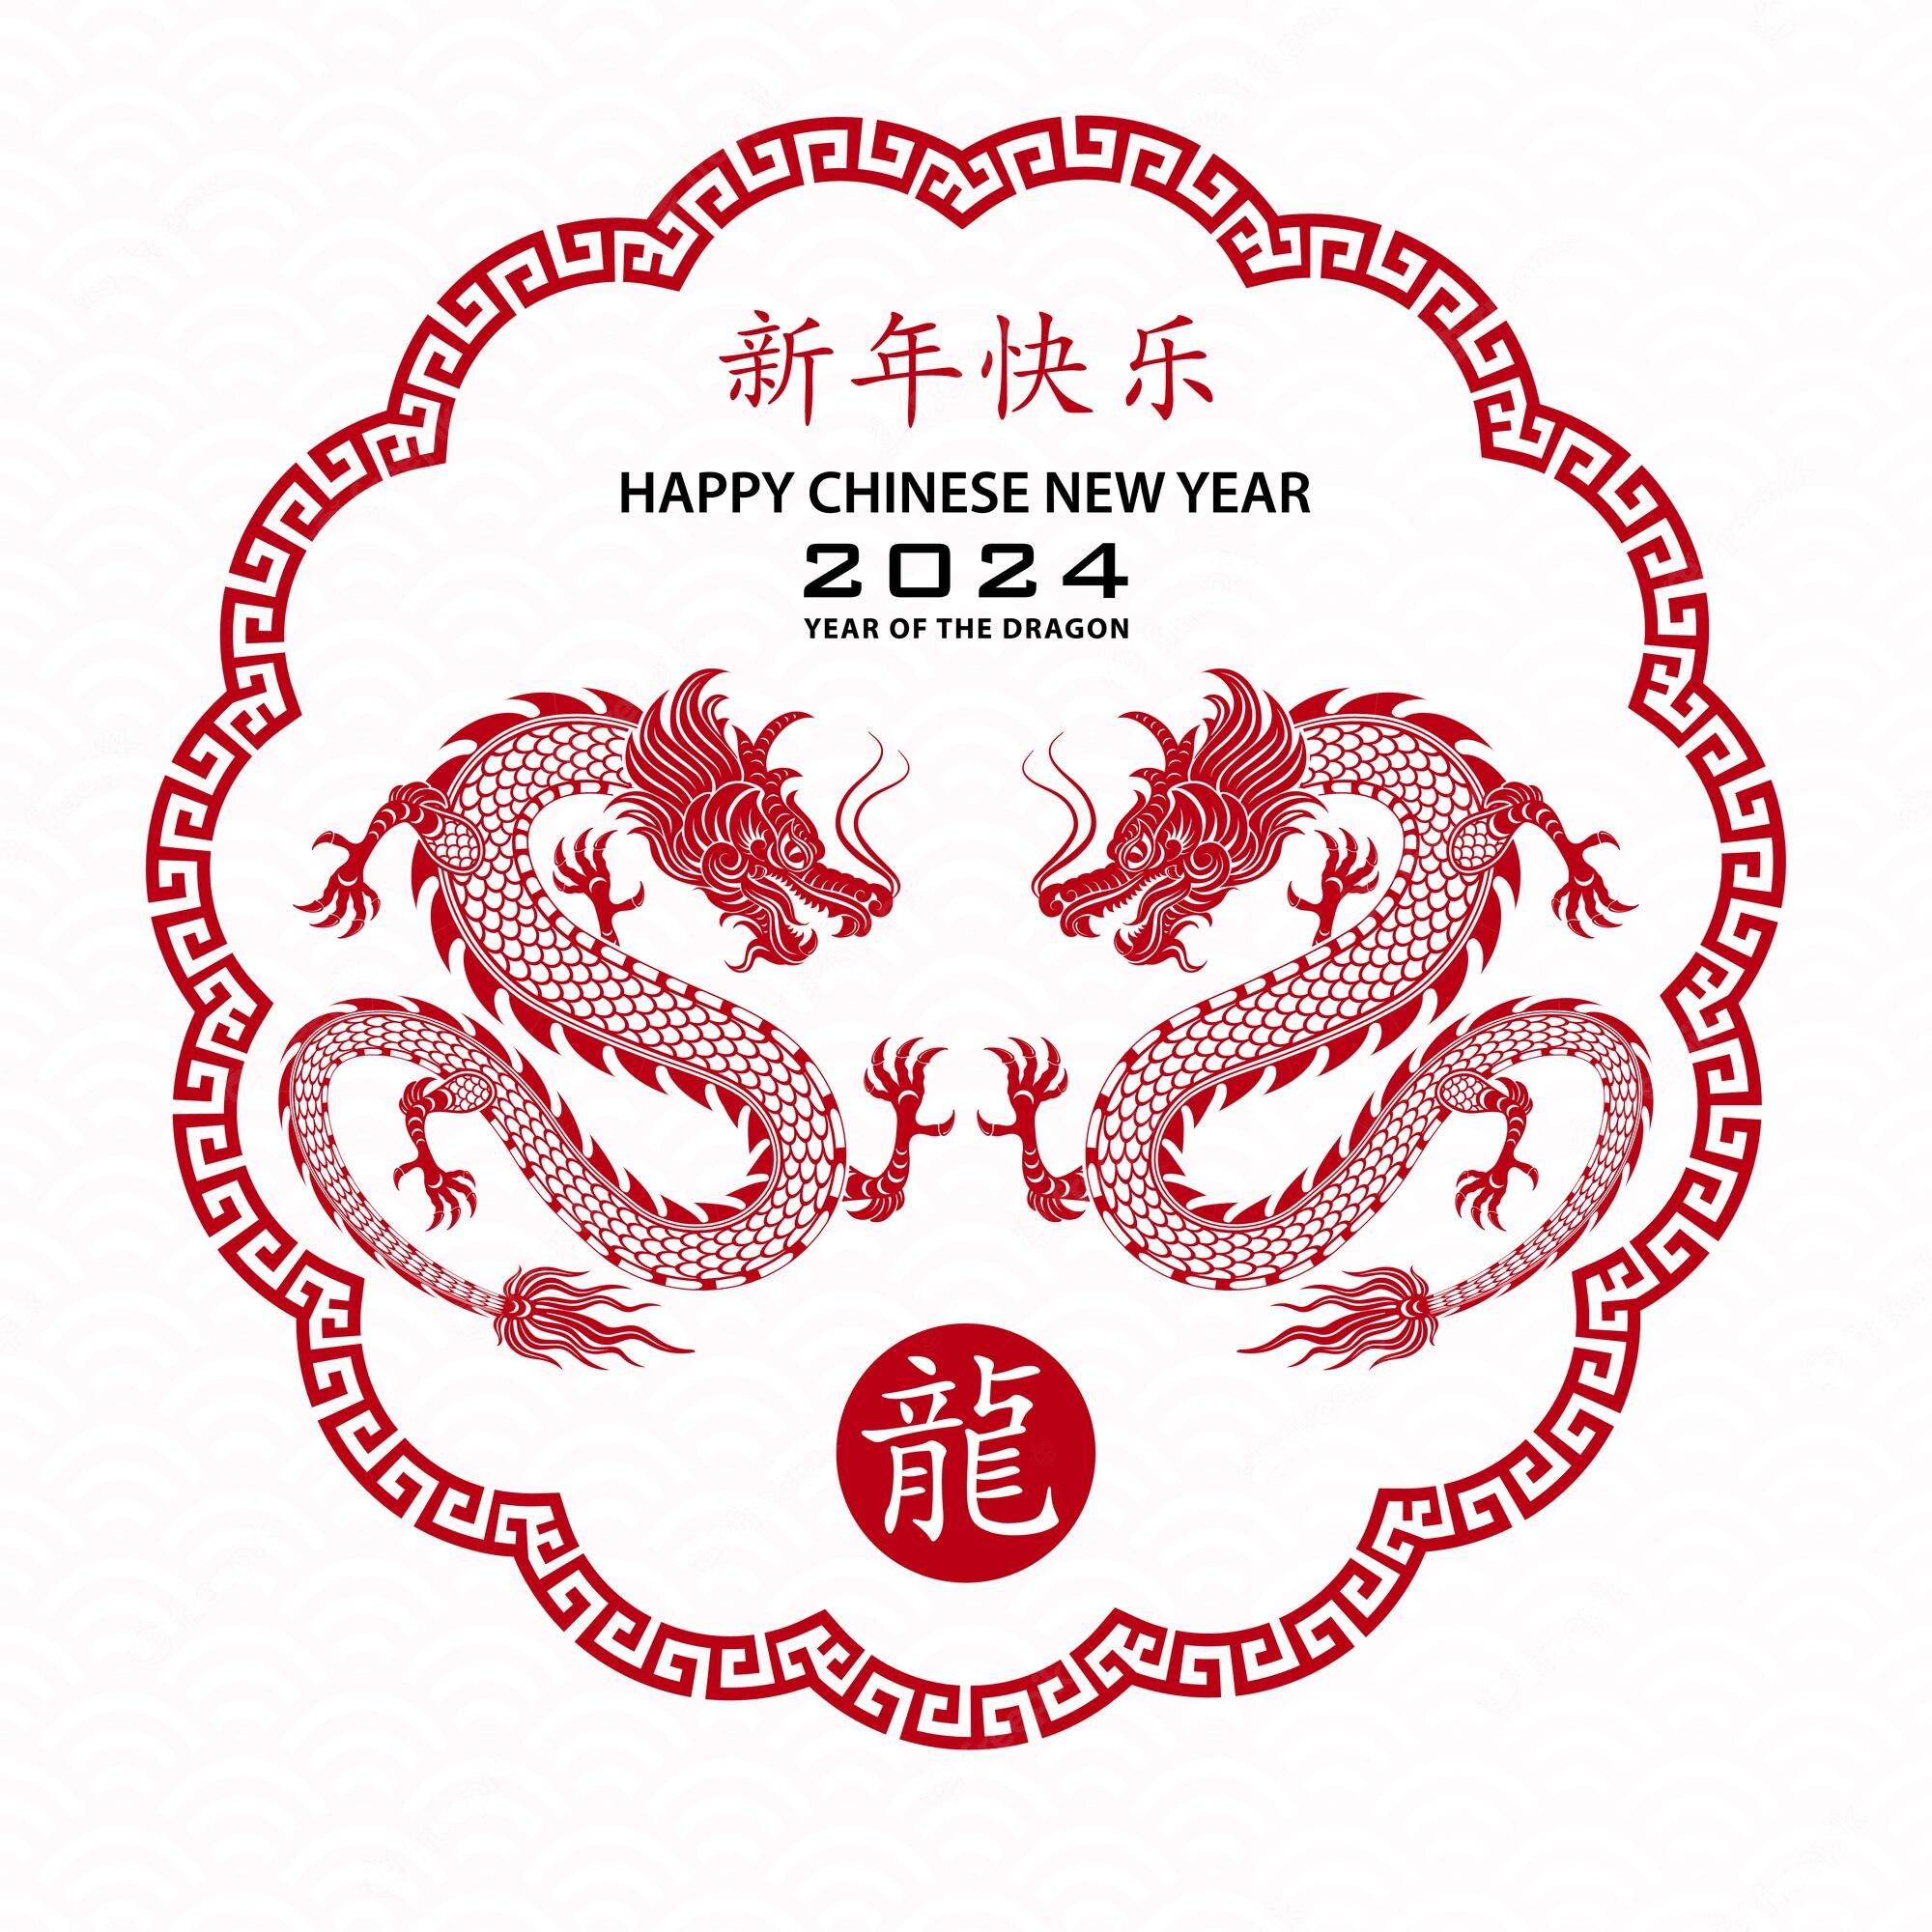 Premium Vector. Happy chinese new year 2024 zodiac sign for year of the dragon